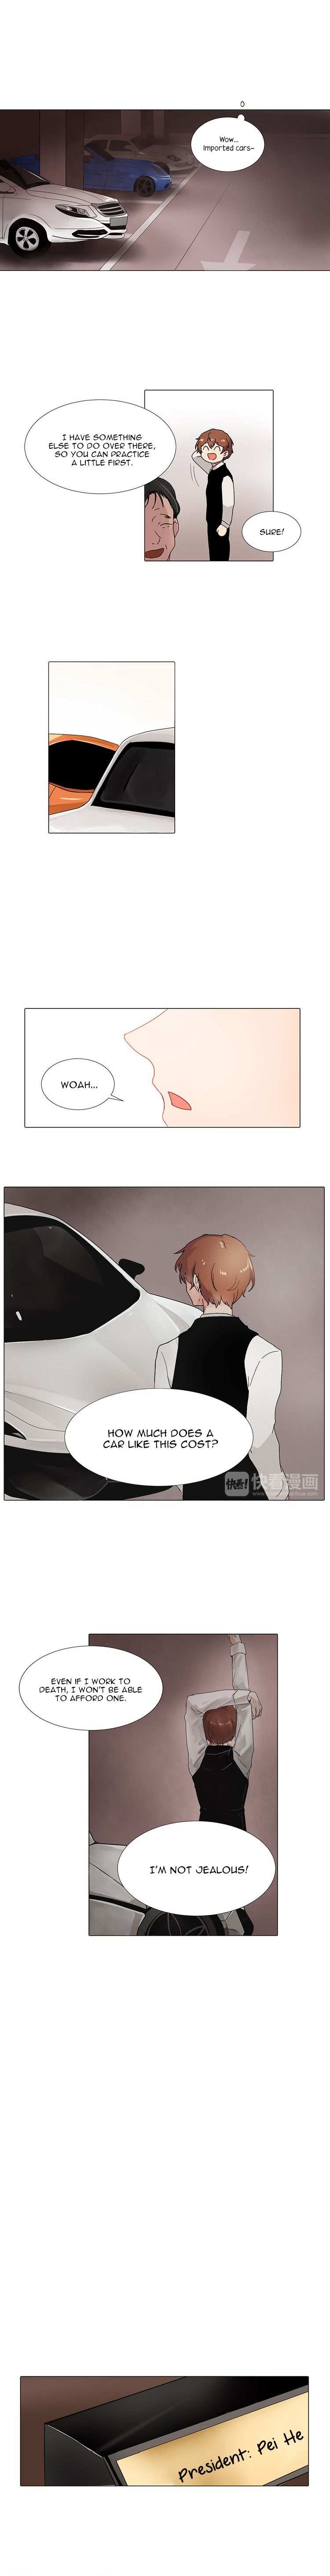 Staring At You chapter 1 - page 11